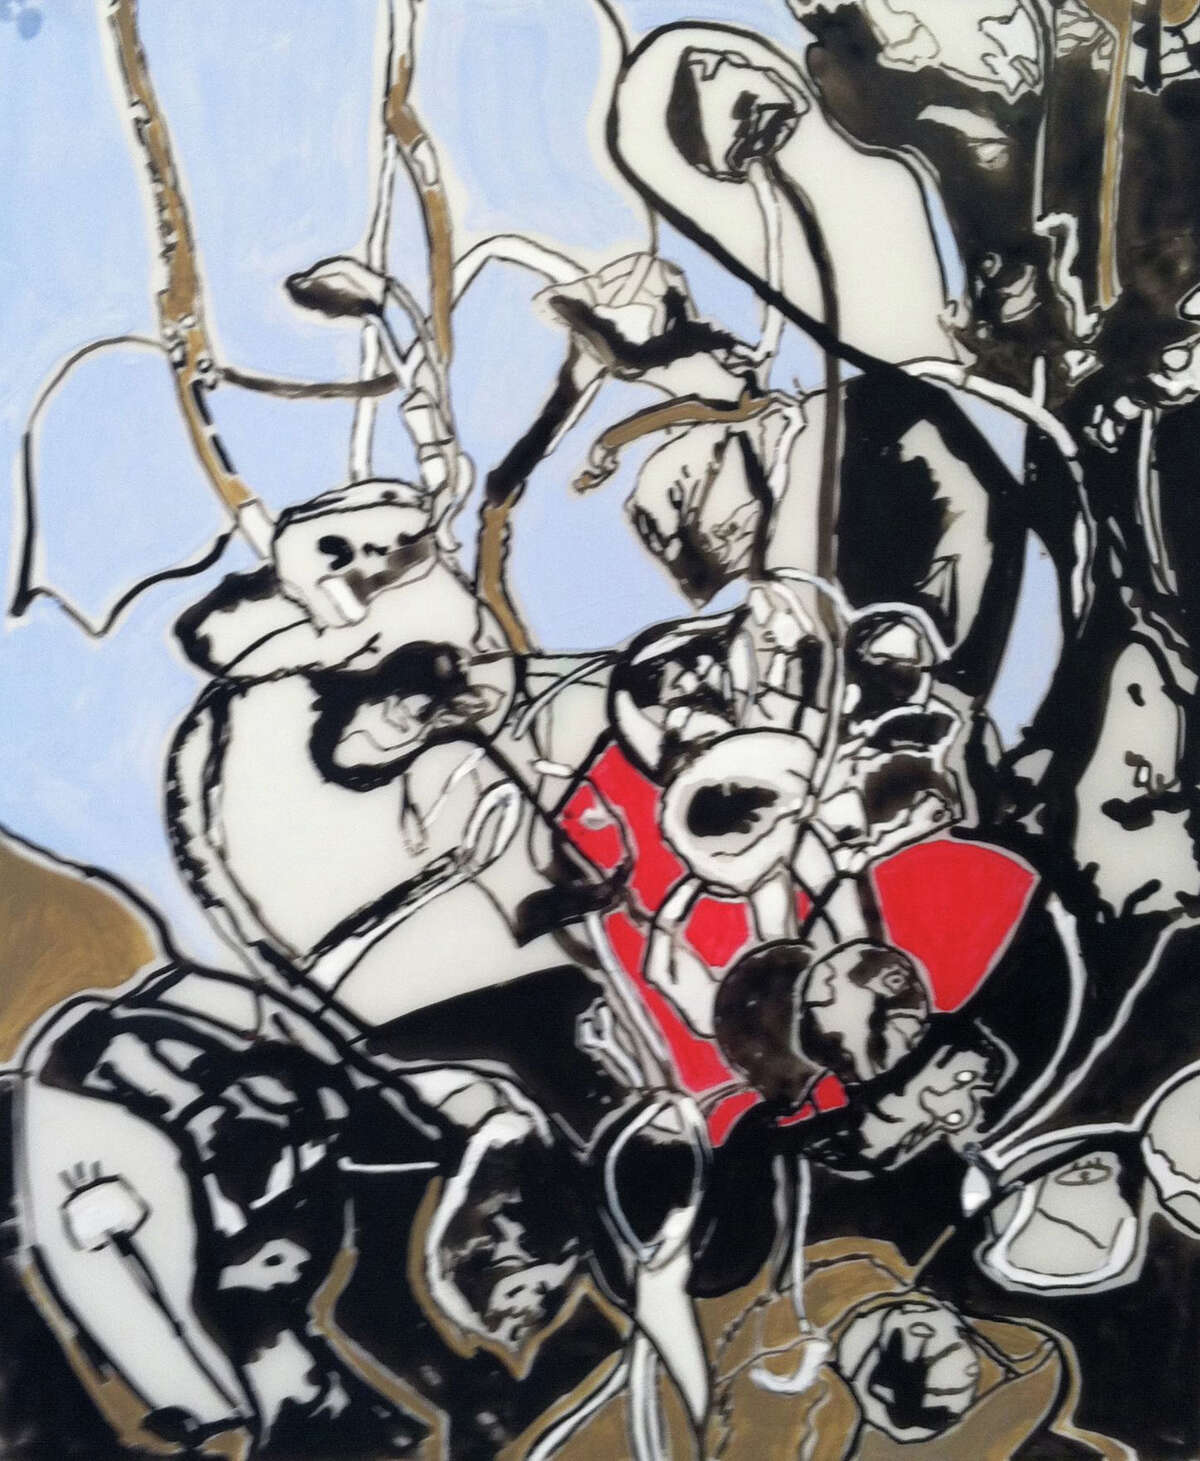 Elizabeth Nagle of New Canaan, whose "Chaos" is an ink drawing with acrylic paint on vellum paper, will be among 22 artists displaying their work at Art/Place in Fairfield.